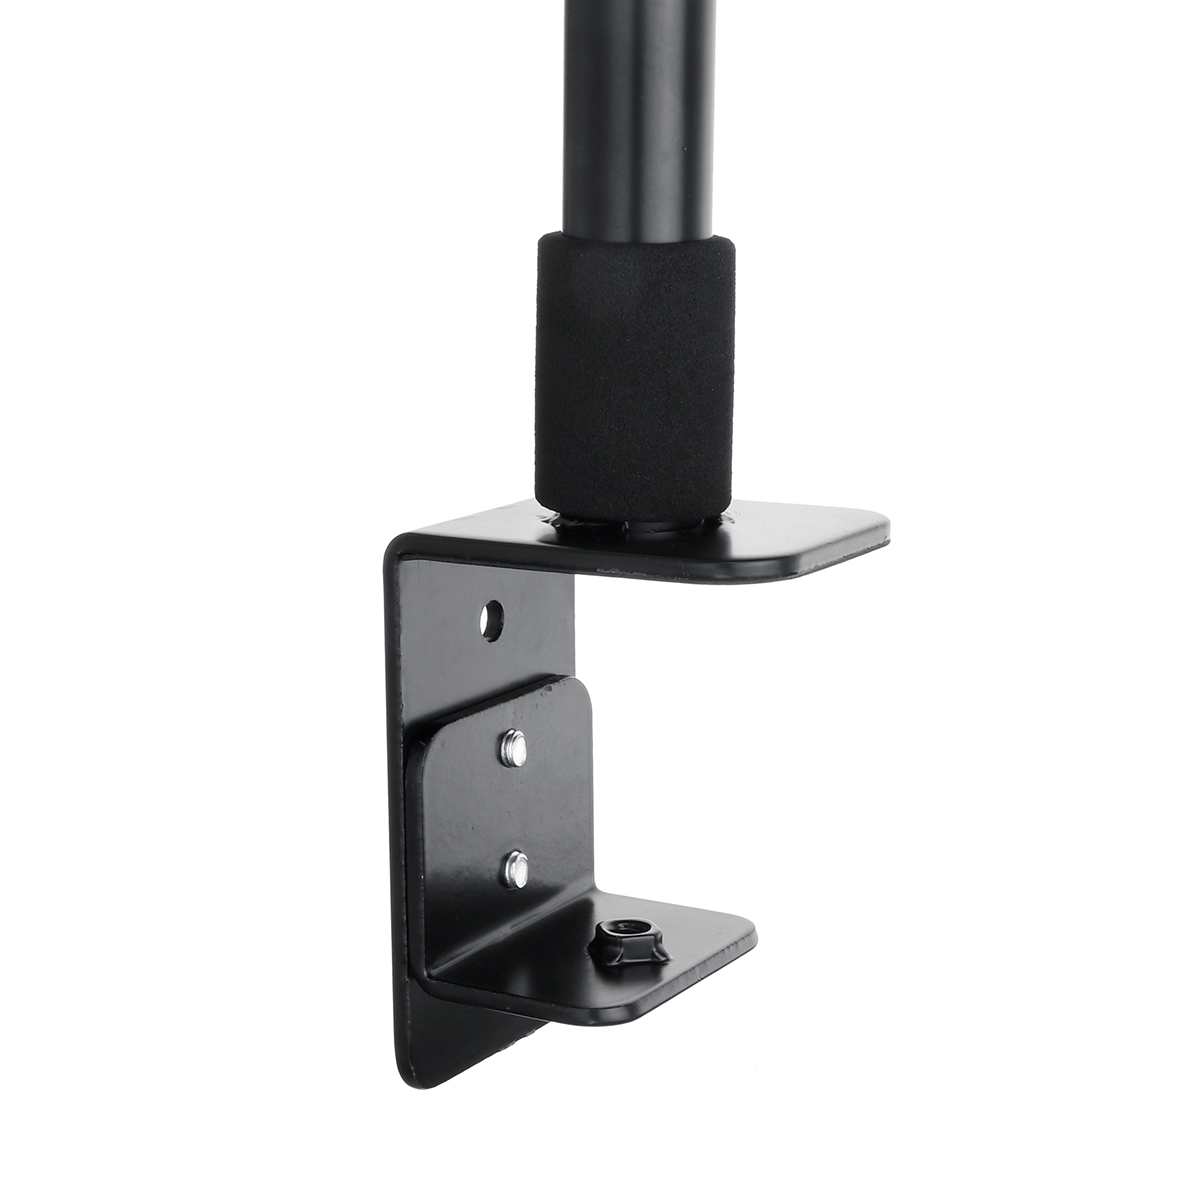 Single-Arm-Desk-Mount-LCD-Computer-Monitor-Bracket-Clamp-Stand-14-27-inch-Screen-TV-Bracket-1900409-8